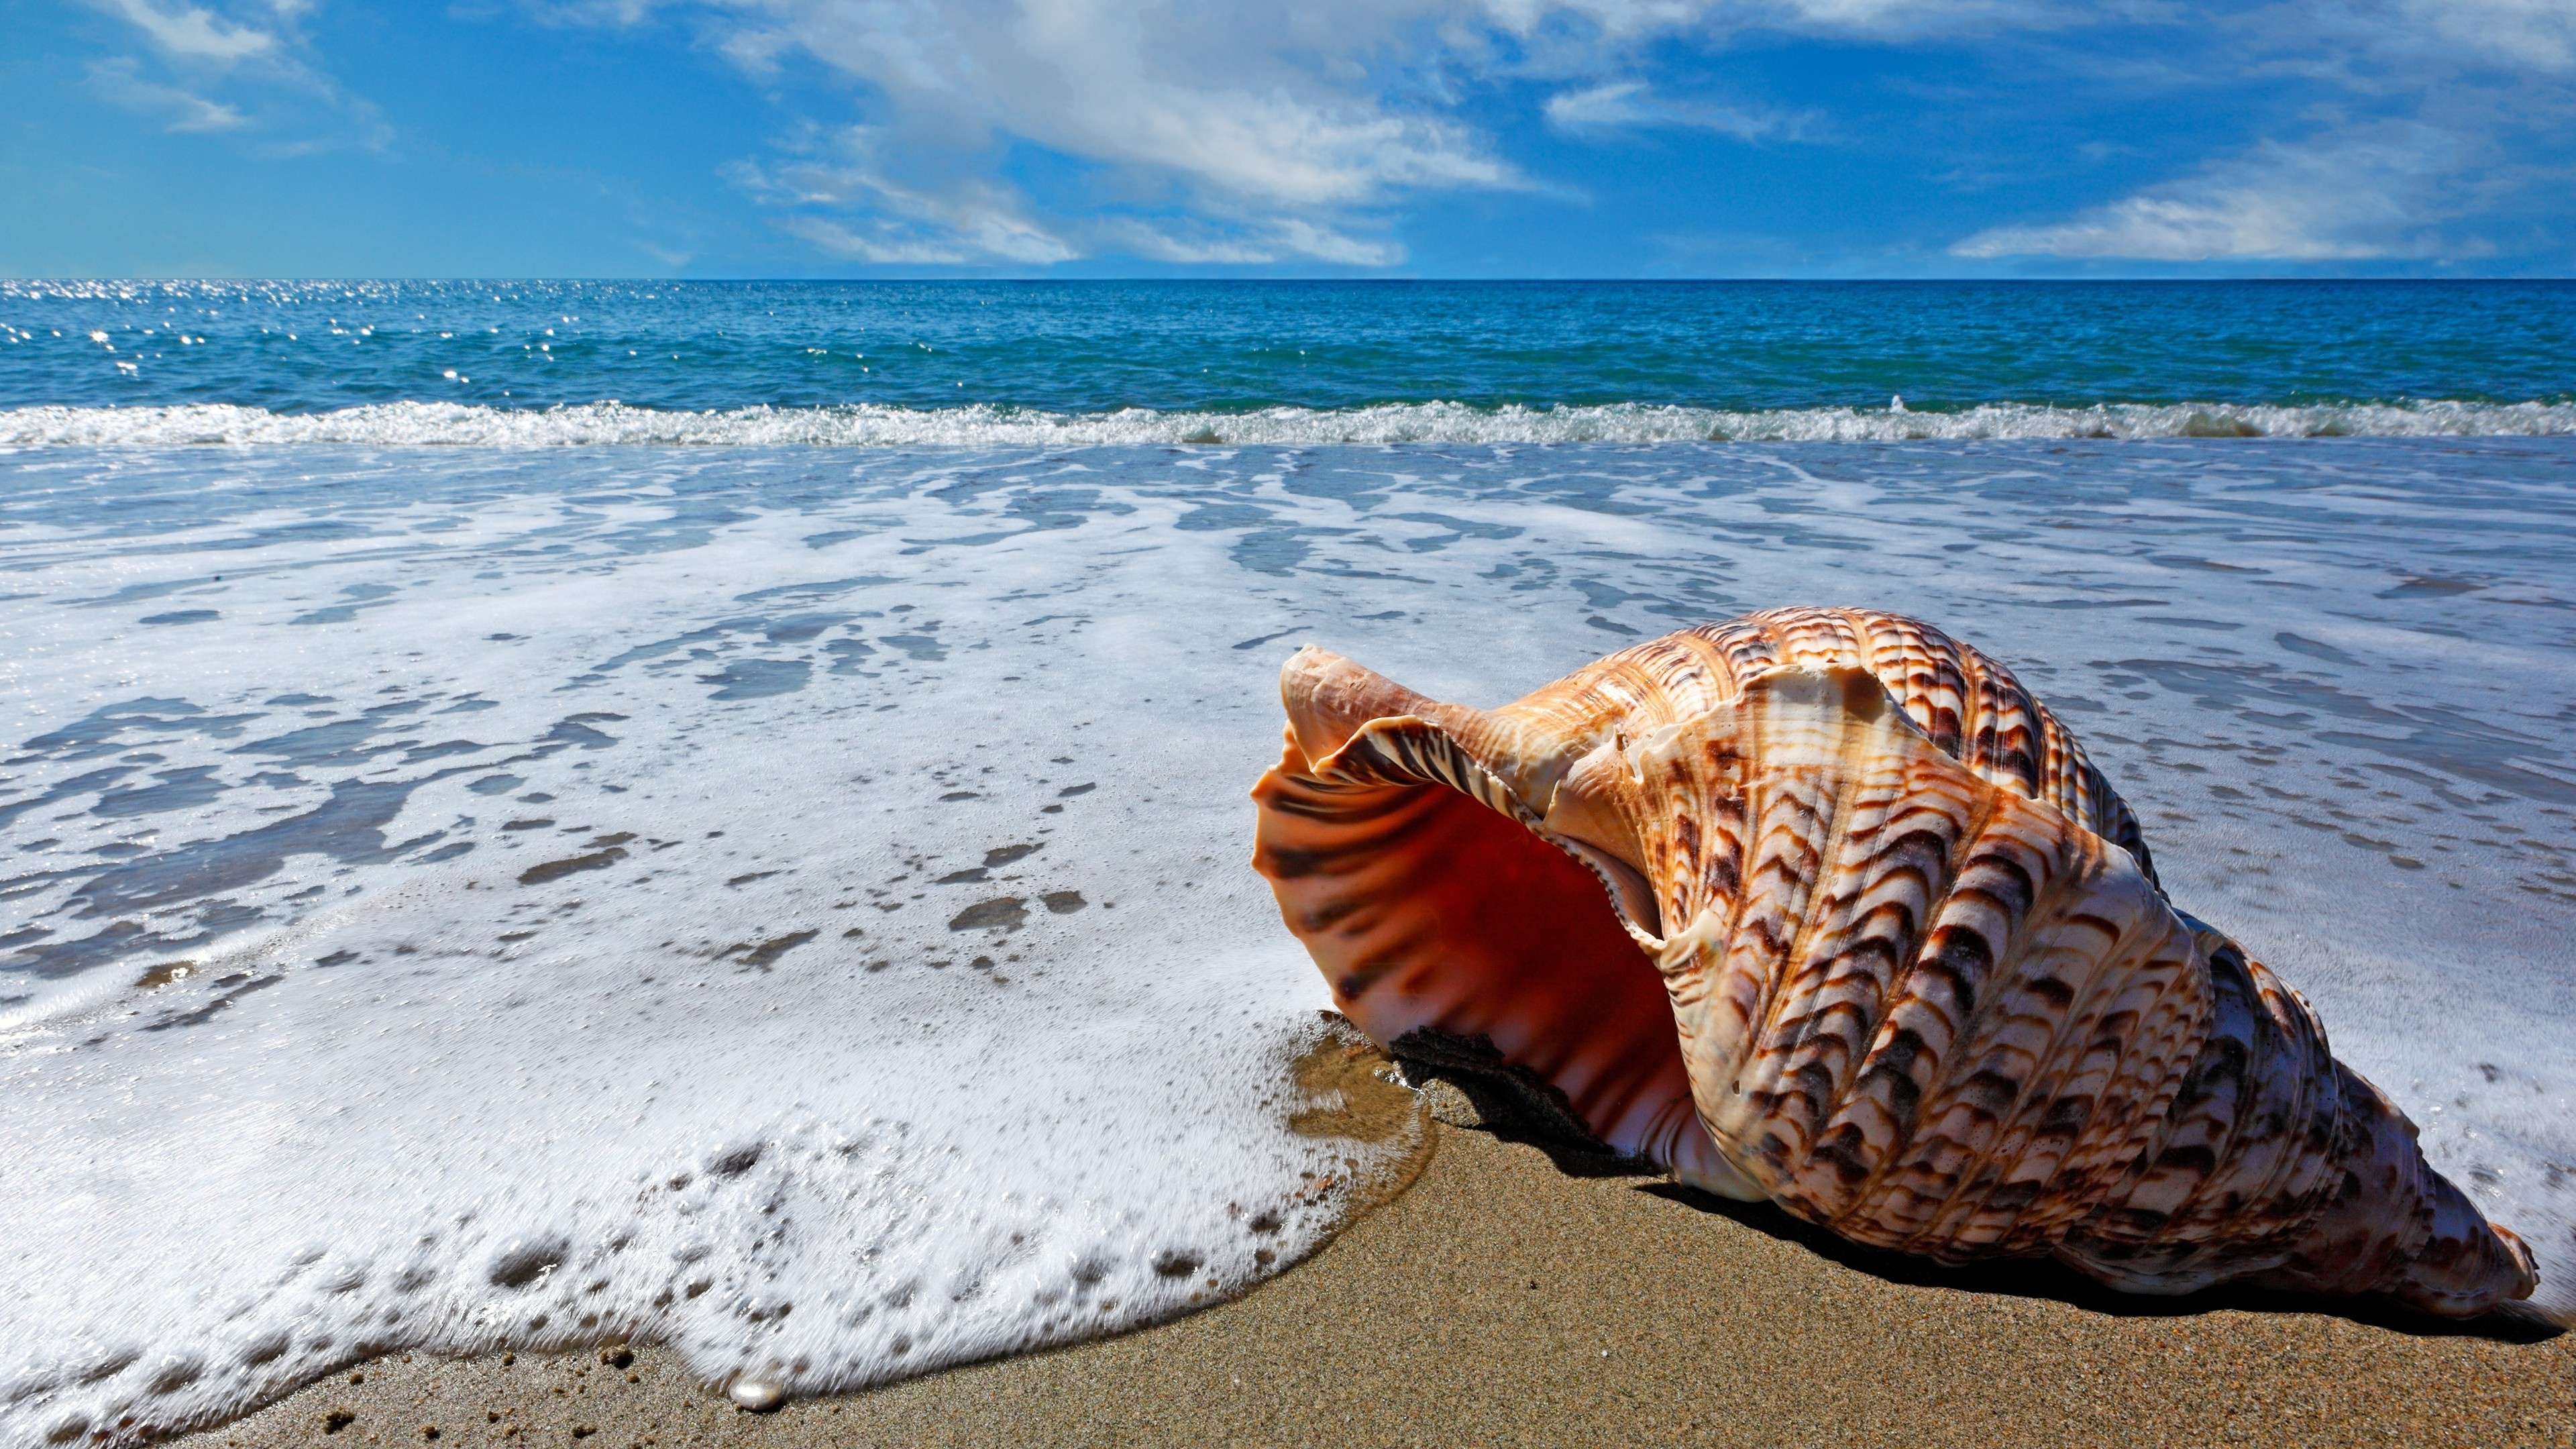 Sea Shell: Beach, Can be a detachable part of the animal's body. 3840x2160 4K Wallpaper.